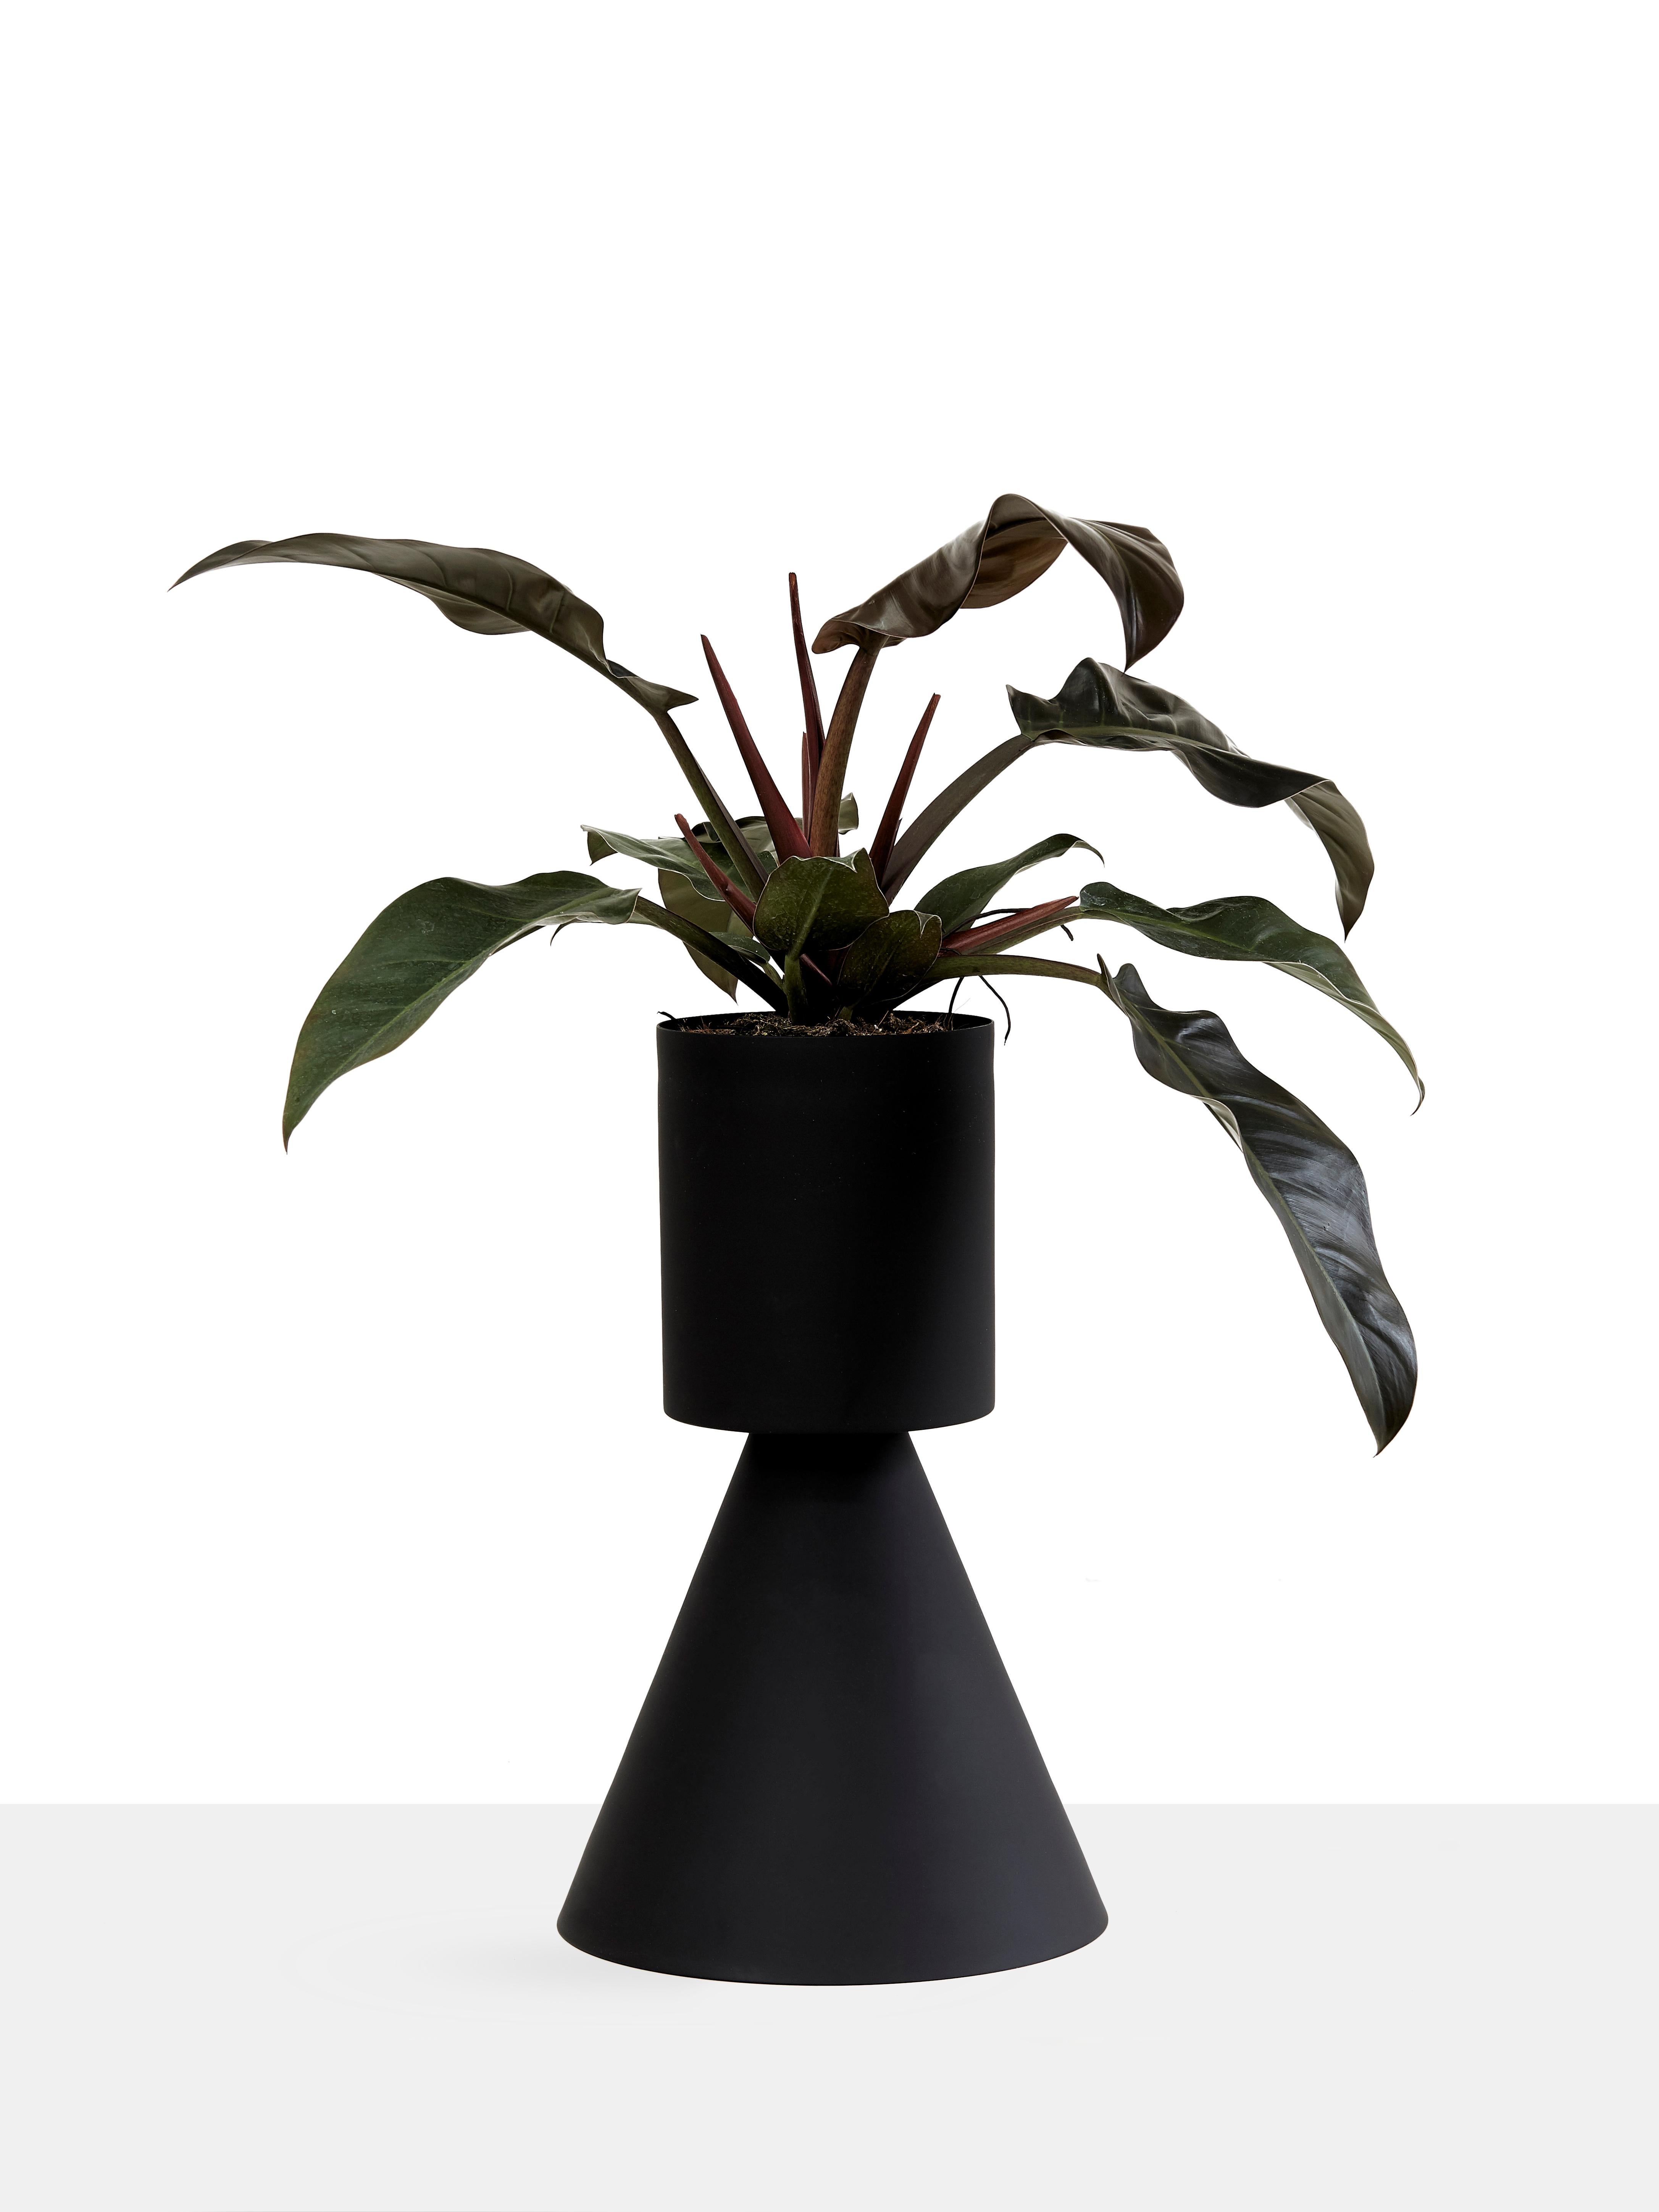 ADA planter was made in a metal spinning process out of aluminum. They come in four types, all can be filled from both sides, allowing for endless combinations from cactus as well as palm trees. 
The planter edition is available in black and